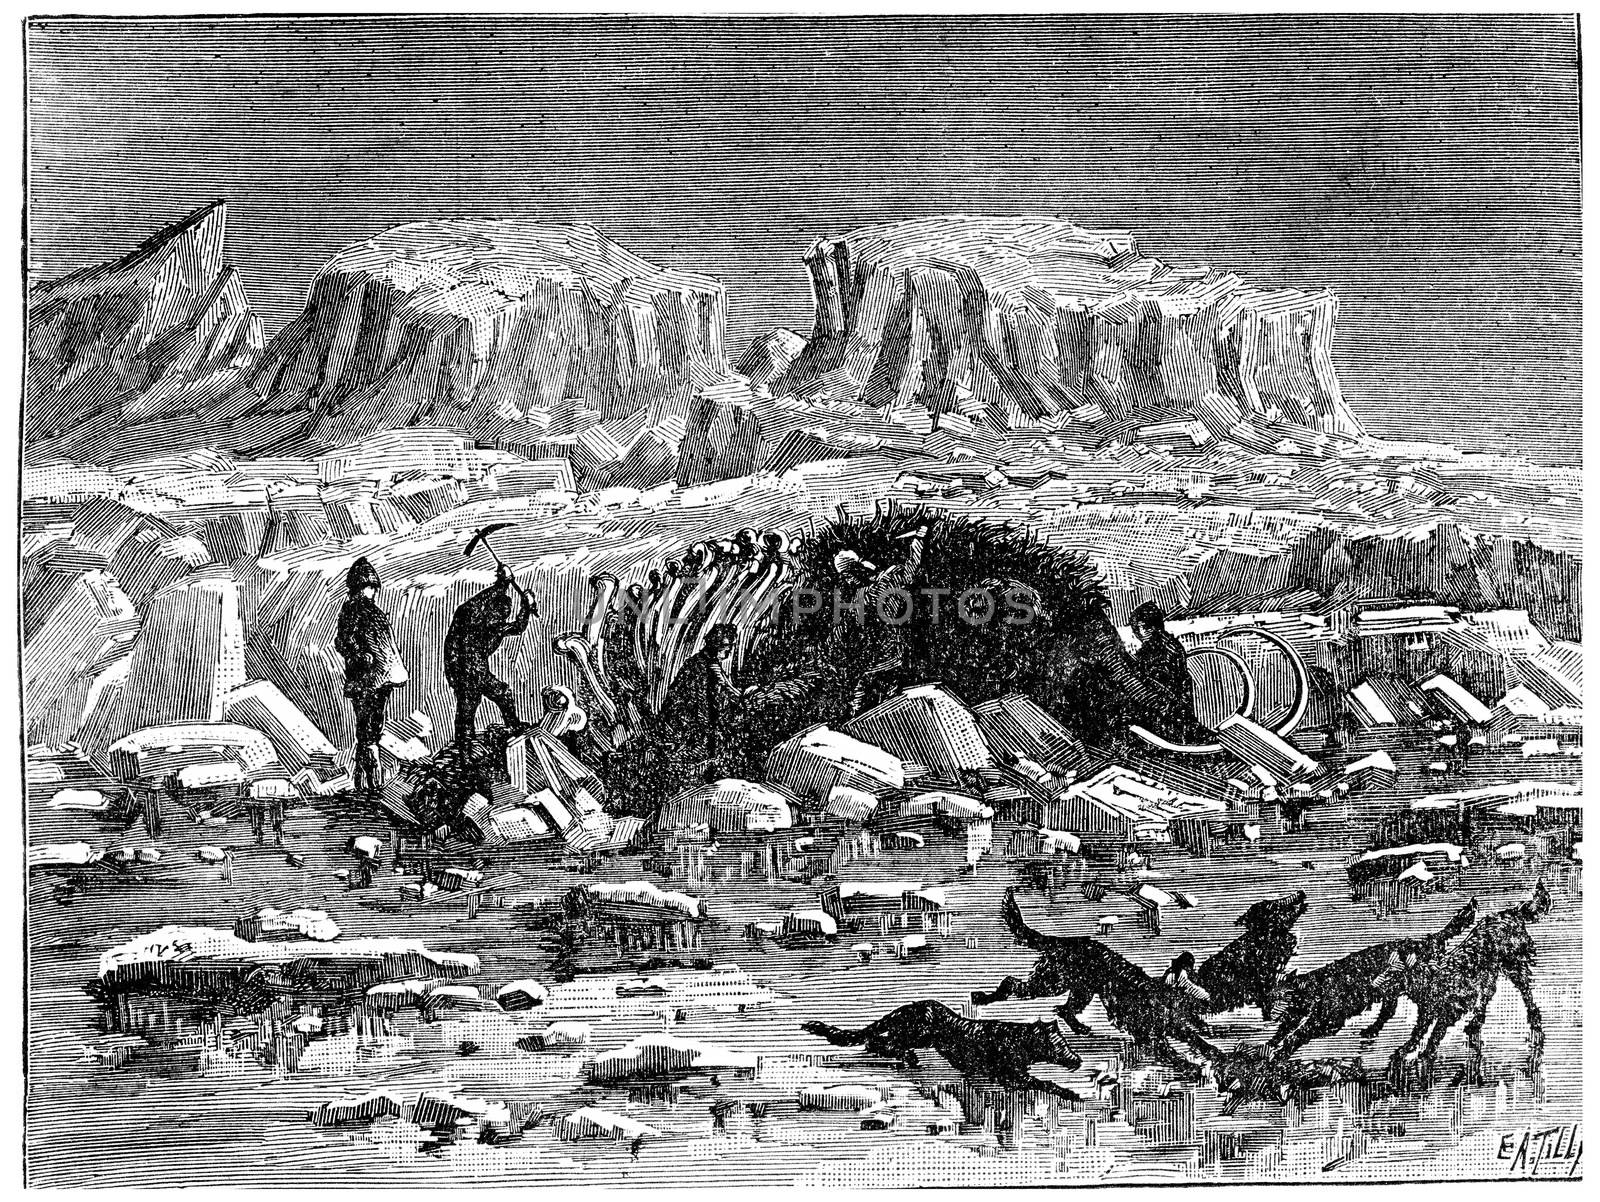 Mammoth found in the ice of Siberia, with its meat and skin, vintage engraved illustration. Earth before man – 1886.